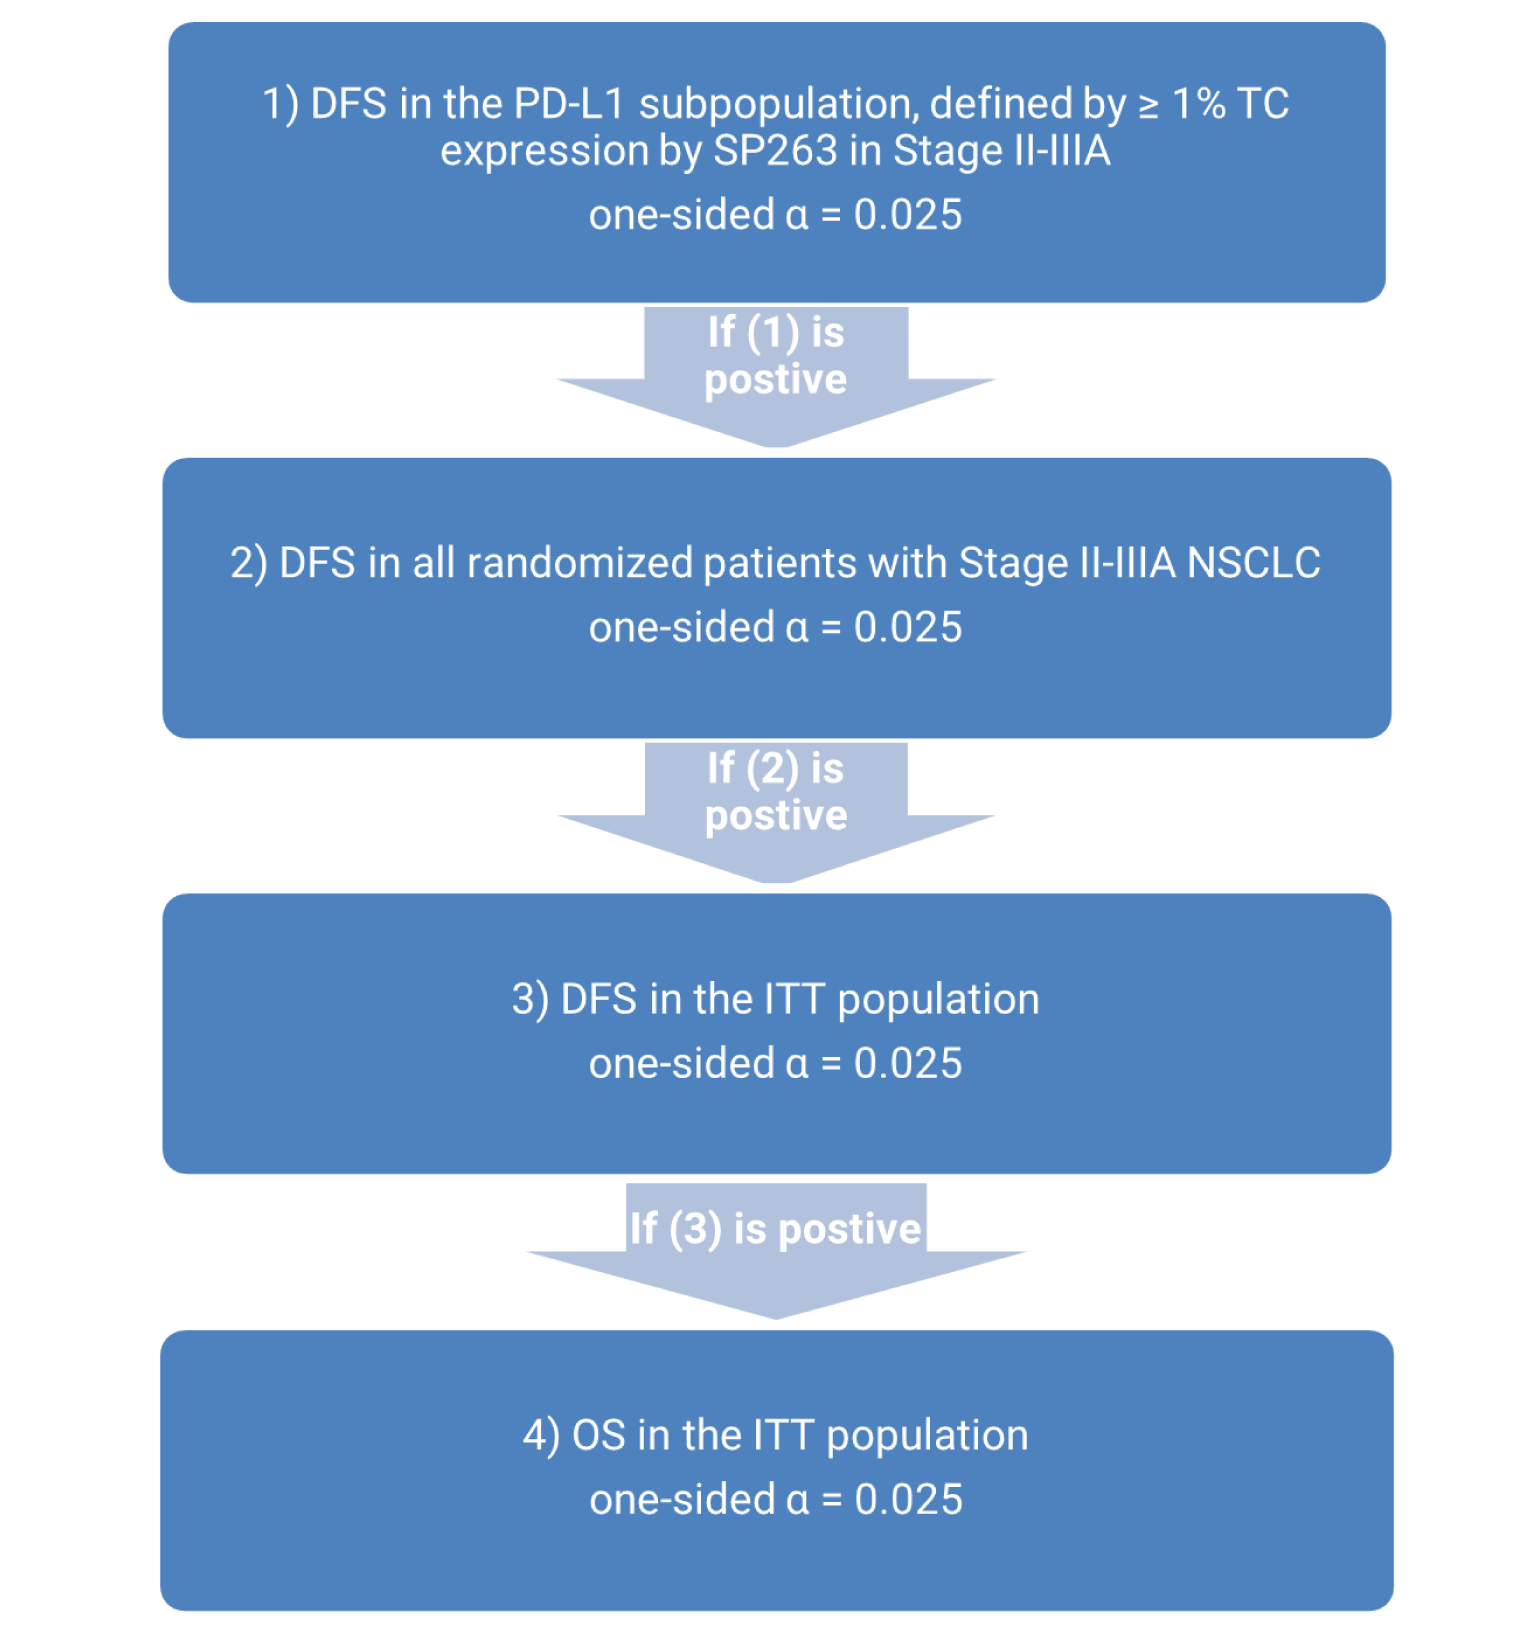 To control for the overall level of significance at a 1-sided error of 0.025, comparisons between the treatment arms were conducted hierarchically beginning with DFS in the PD-L1 subpopulation defined by SP263 TC of at least 1% within the stage II to IIIA population. If the results were positive at a 1-sided alpha of 0.025, then DFS in the entire randomized stage II to IIIA population was assessed. If the outcome was positive at 1-sided alpha of 0.025, then then DFS followed by OS was assessed in the ITT population.